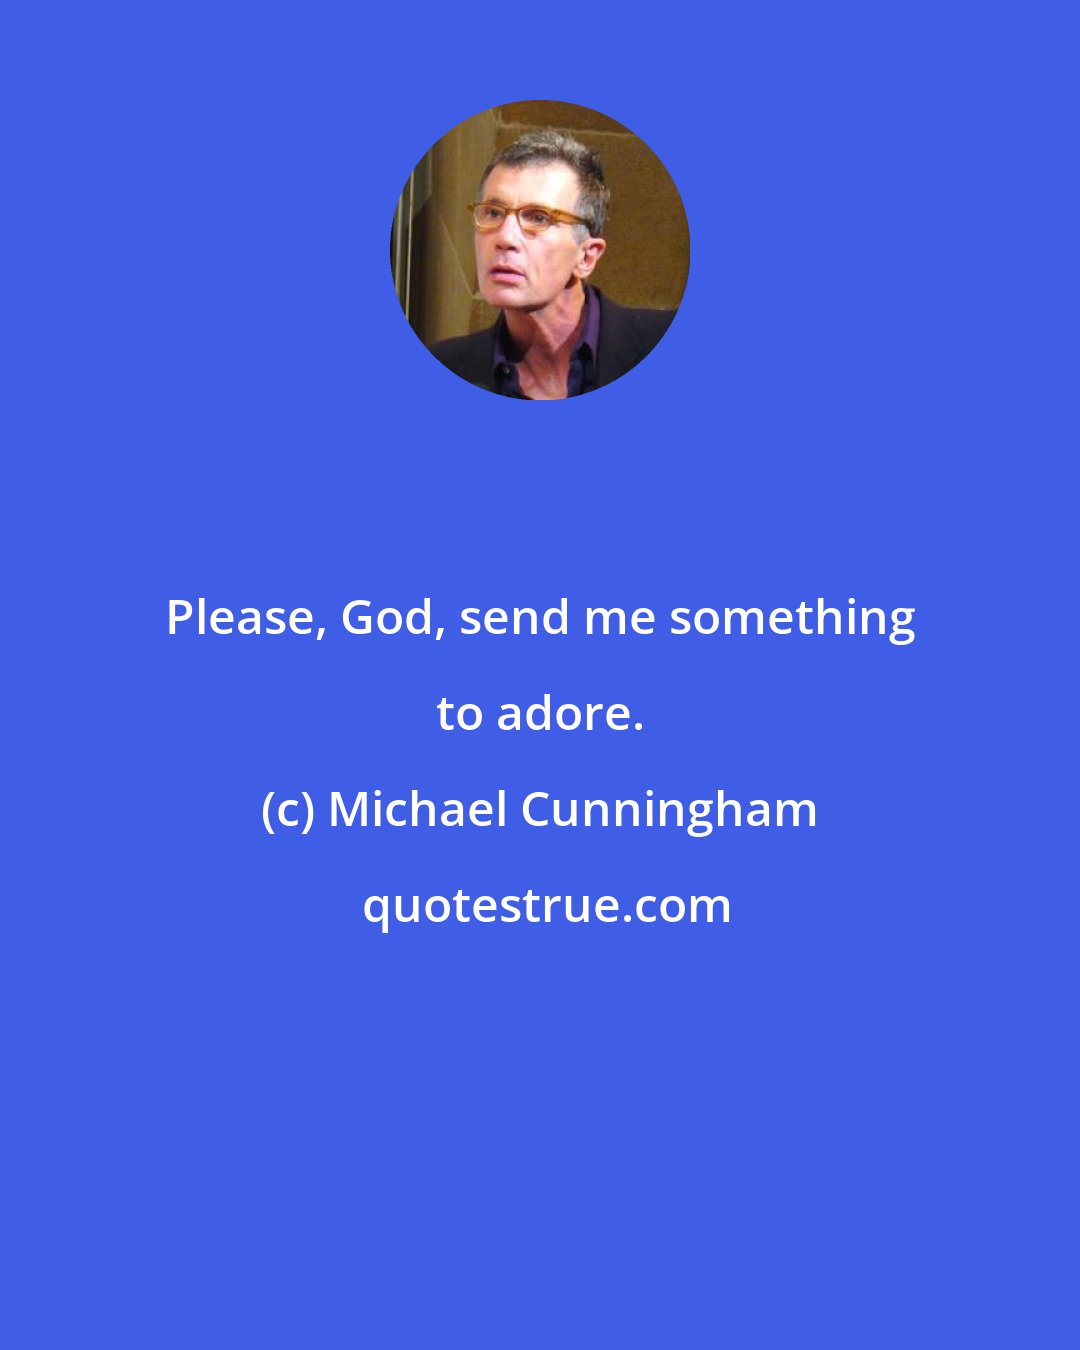 Michael Cunningham: Please, God, send me something to adore.